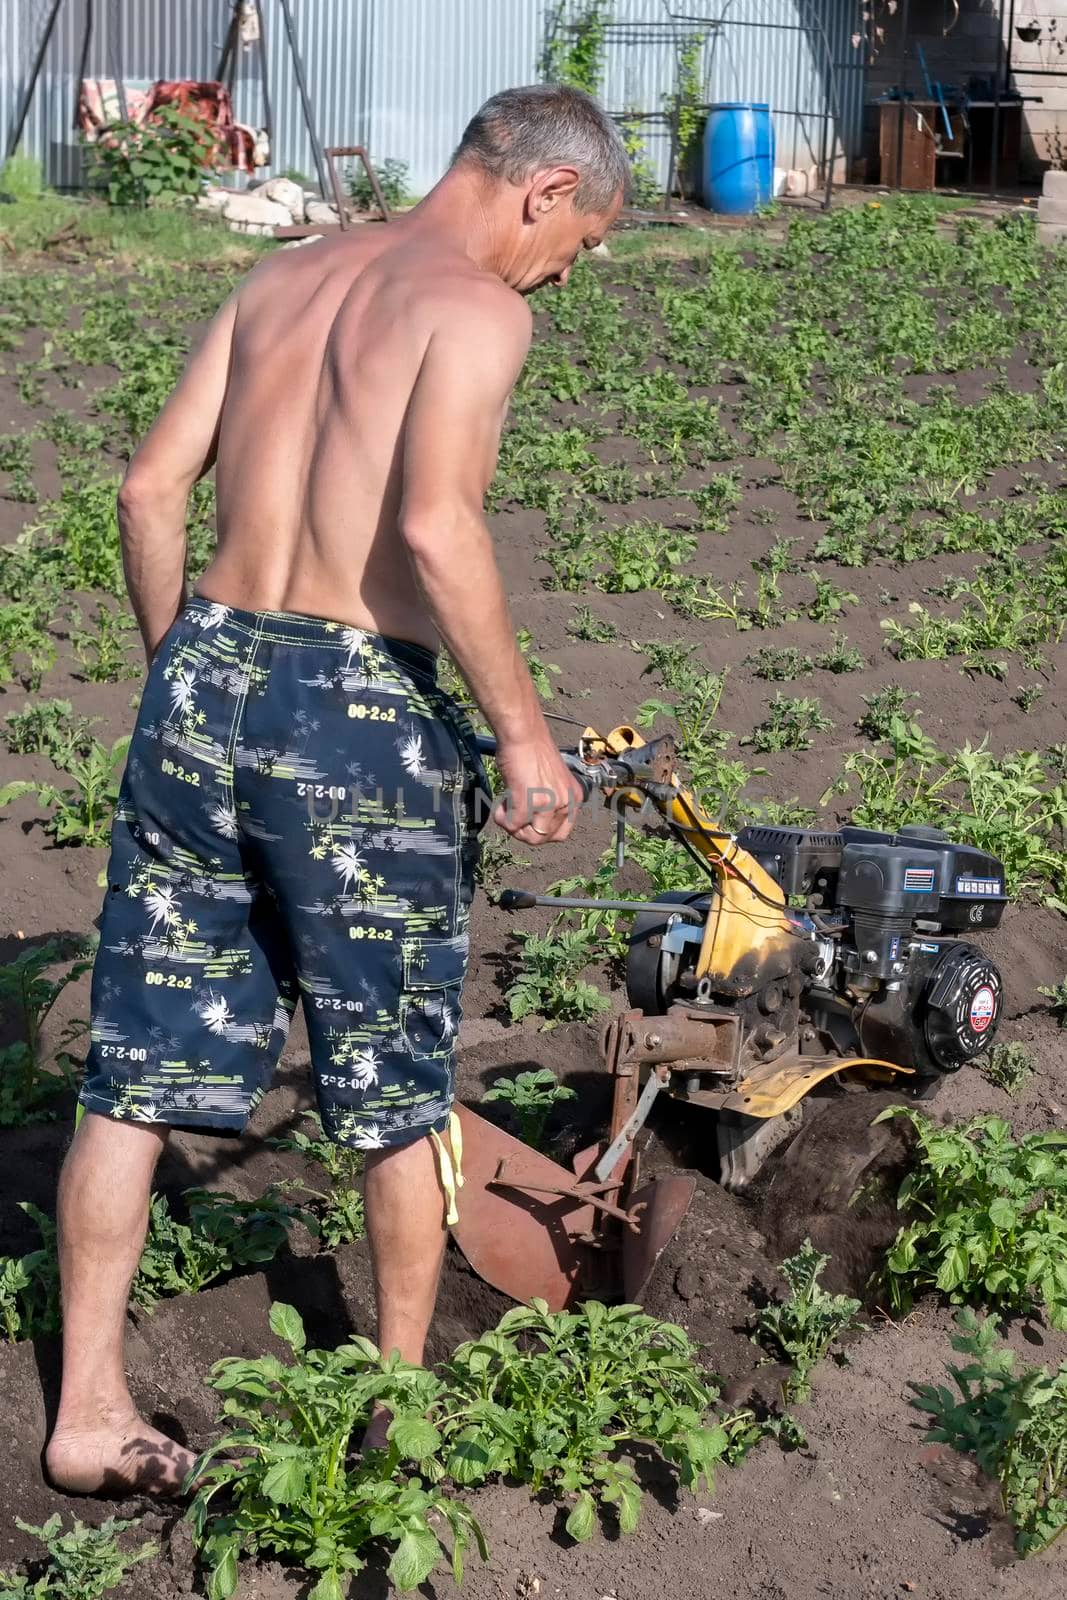 Man dipps potatoes with agromashine motorcultivator. Bashkortostan, Russia - 12 June, 2021. by Essffes